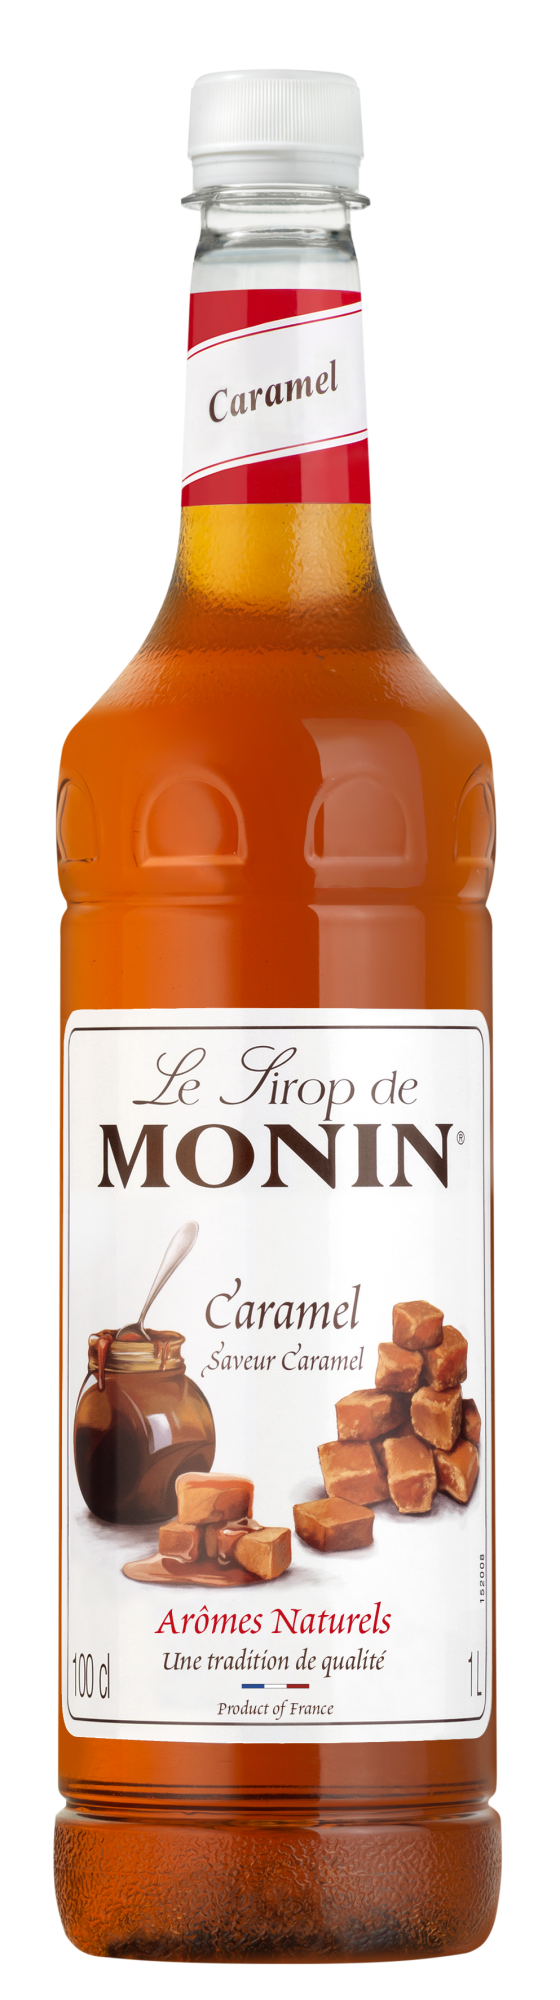 Buy MONIN Caramel syrup. It's a perfect match for all coffee, chocolate and cocktail.